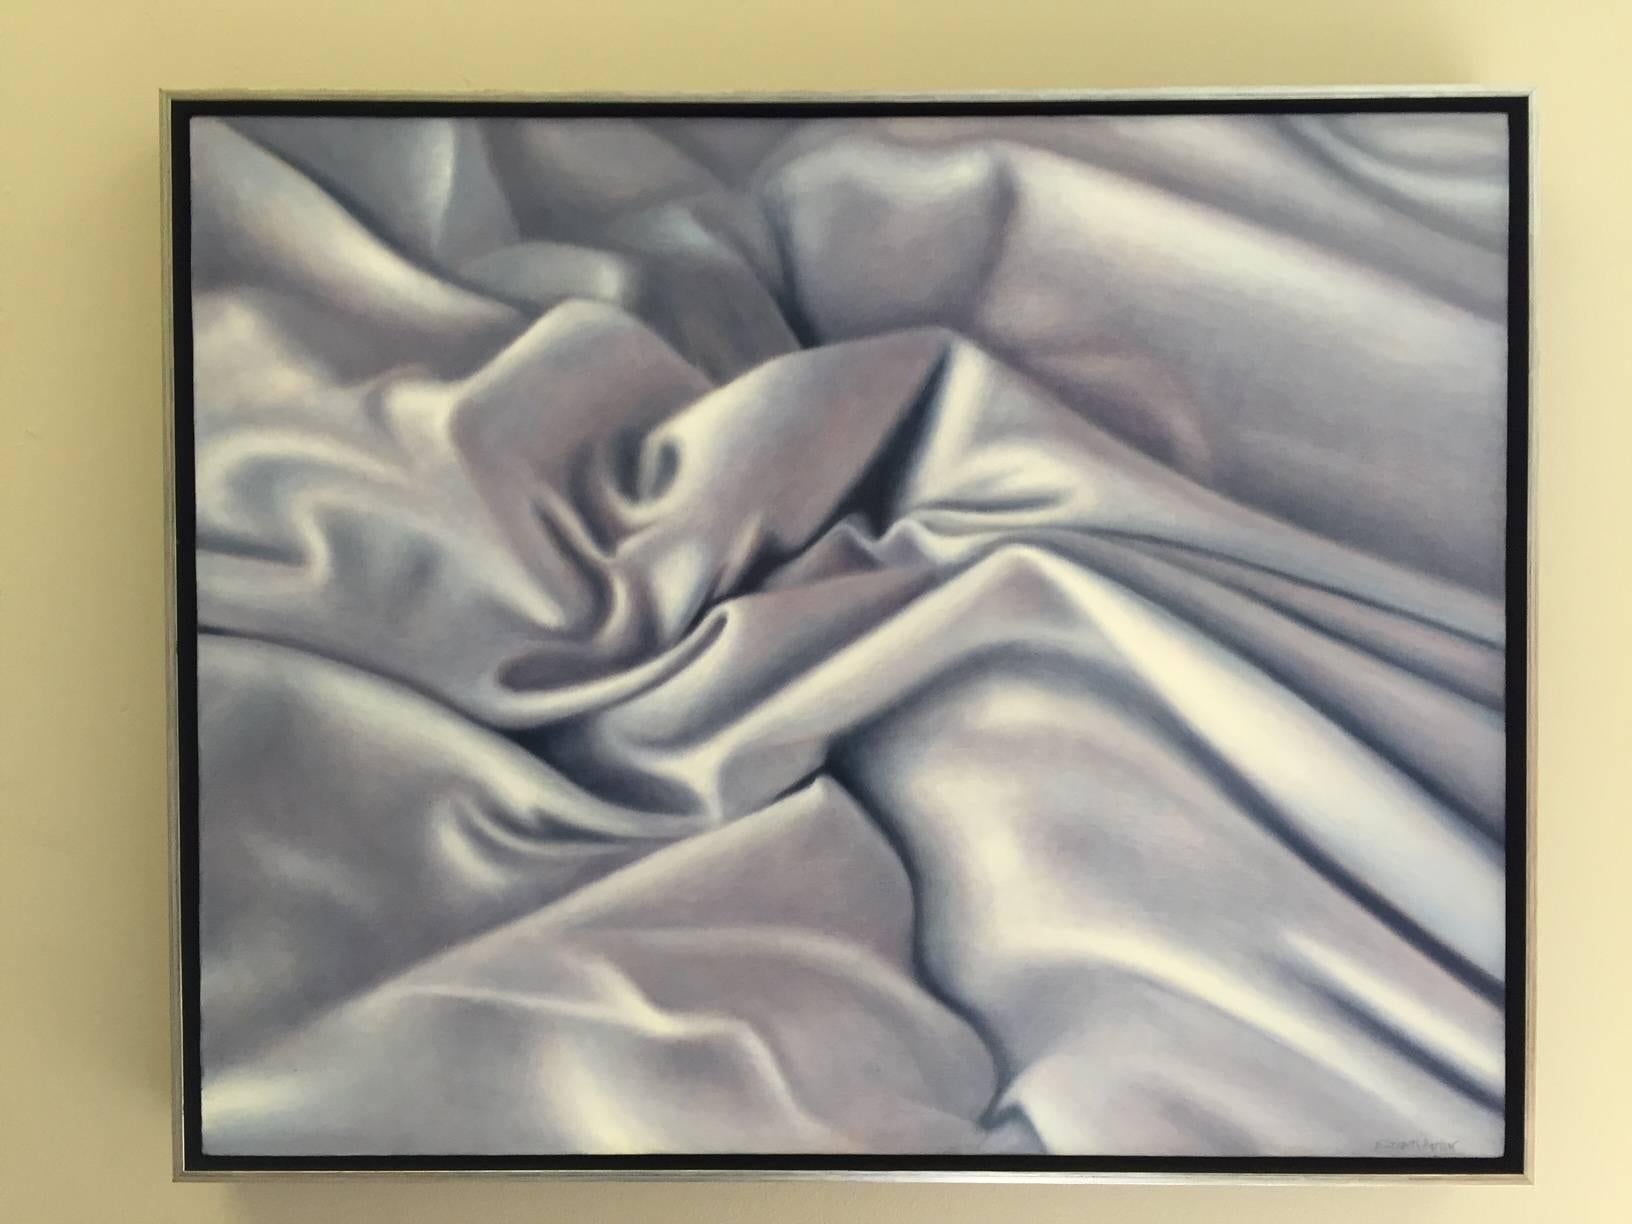 Arise / bedroom sheets - oil on linen - Painting by Elizabeth Barlow